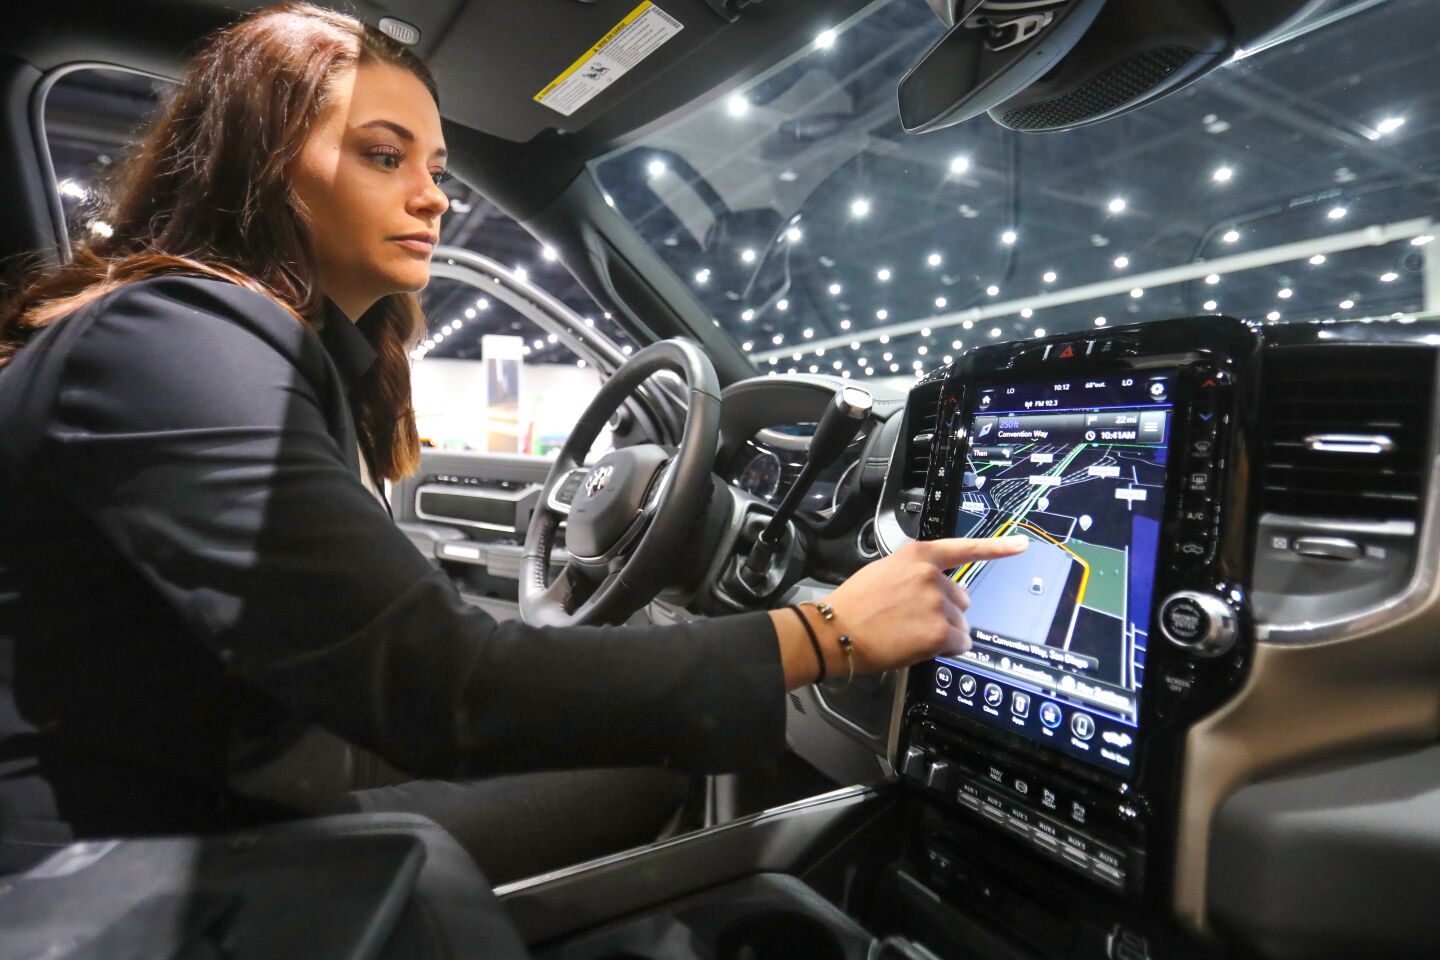 Emily, a product specialist in the Fiat Chrysler Automobiles display space during the 2020 San Diego International Auto Show, January 4, 2020 at the San Diego Convention Center, demonstrates the 12 inch in-vehicle touchscreen display, in a 2019 Ram 2500 Laramie Crew Cab 4x4 pickup truck.